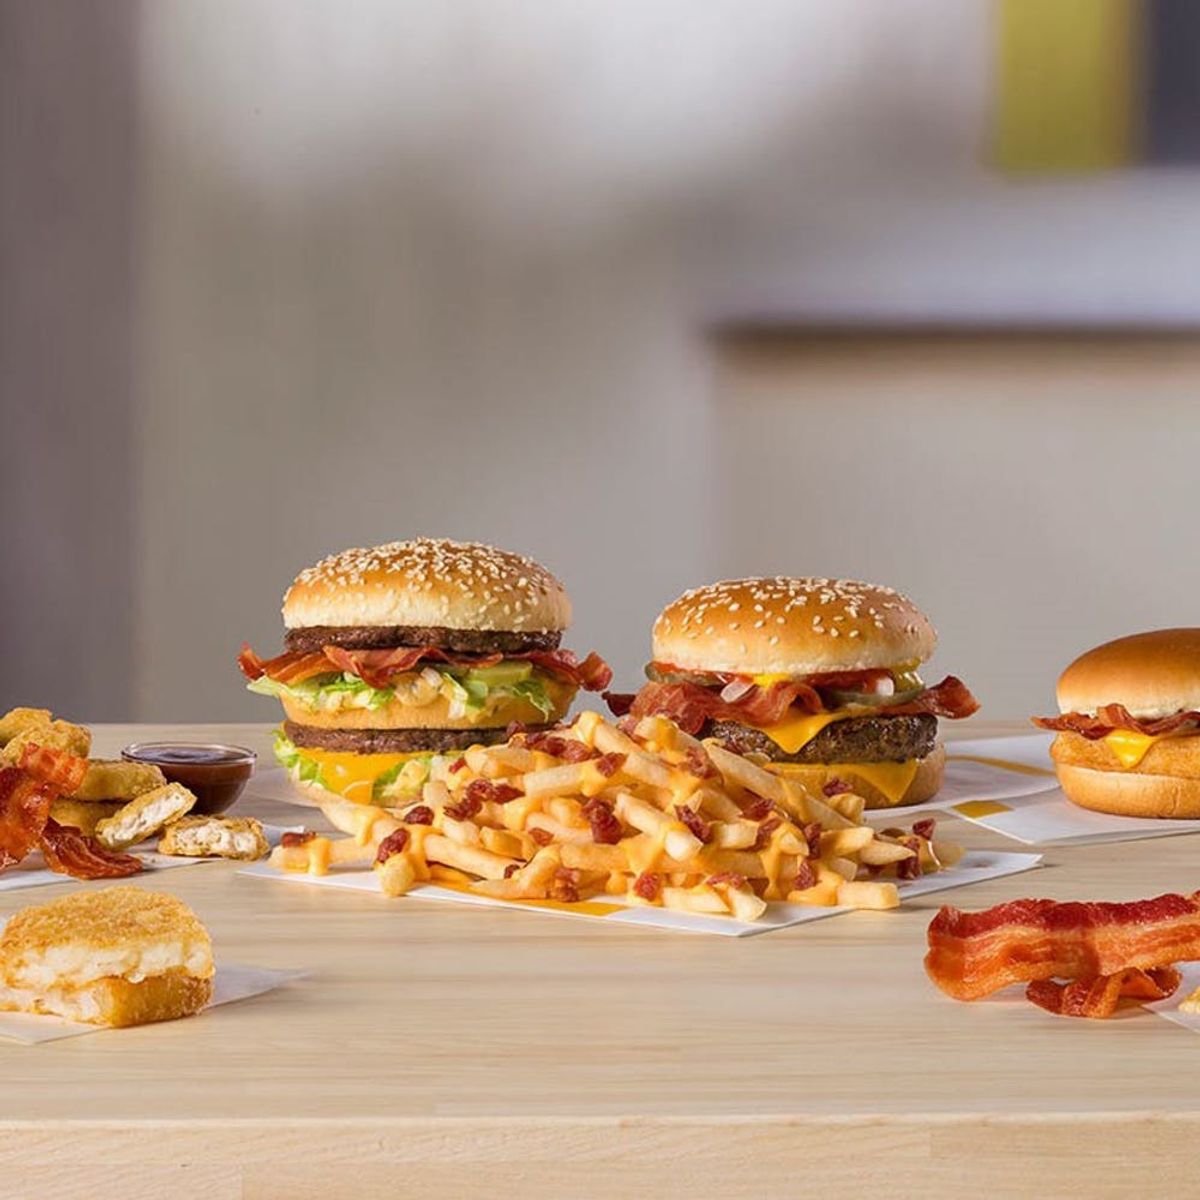 PSA: For One Hour Only, You Can Add Free Bacon to Any Menu Item at McDonald’s